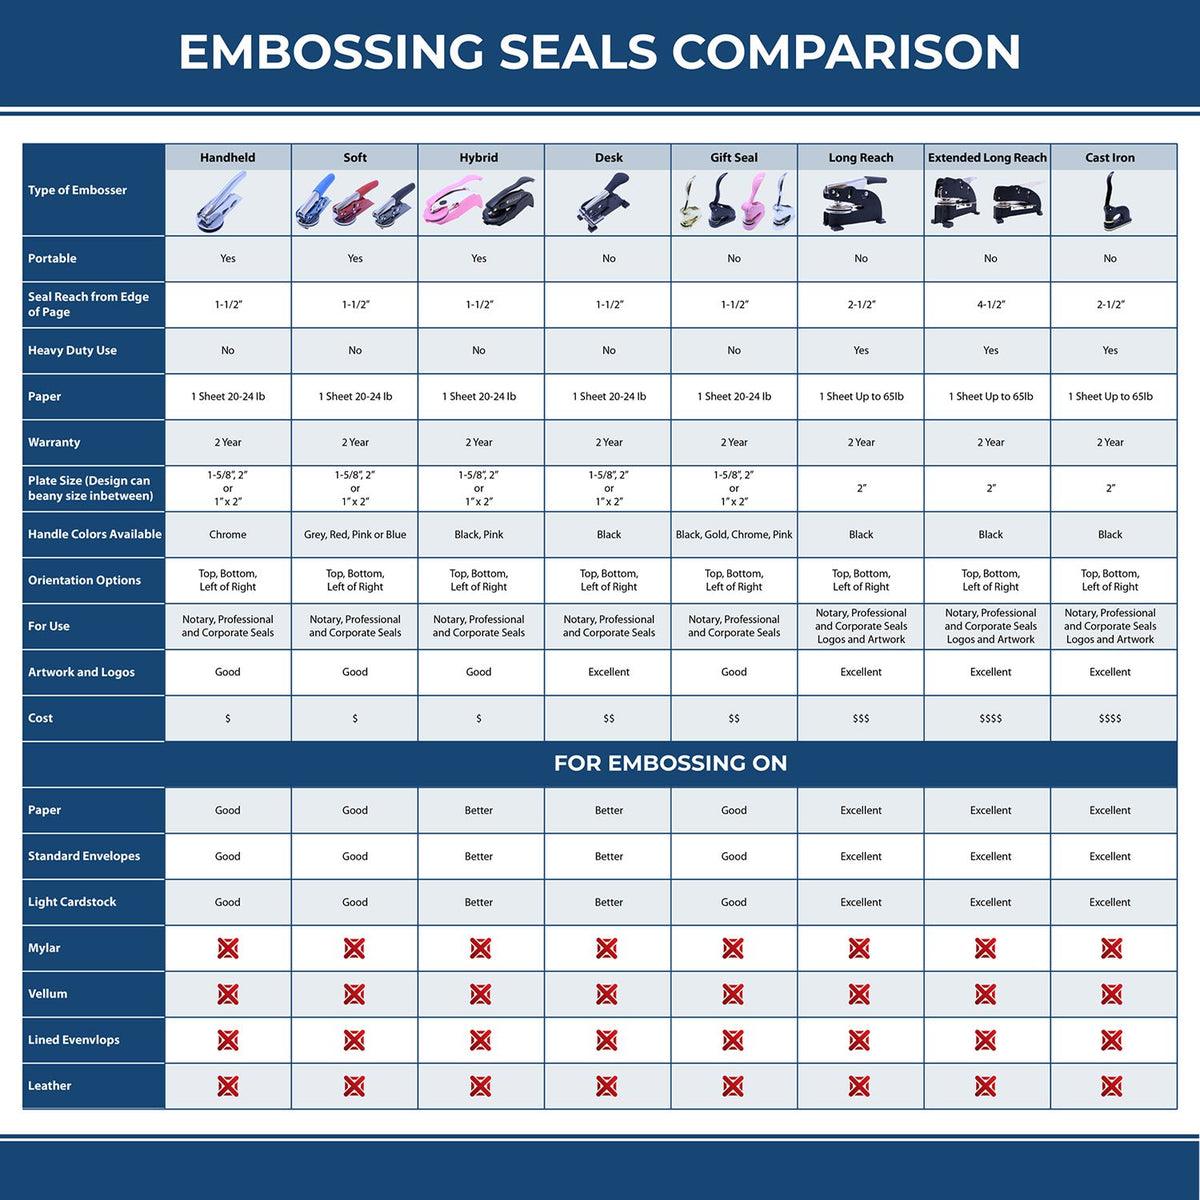 A comparison chart for the different types of mount models available for the Handheld Georgia Professional Geologist Embosser